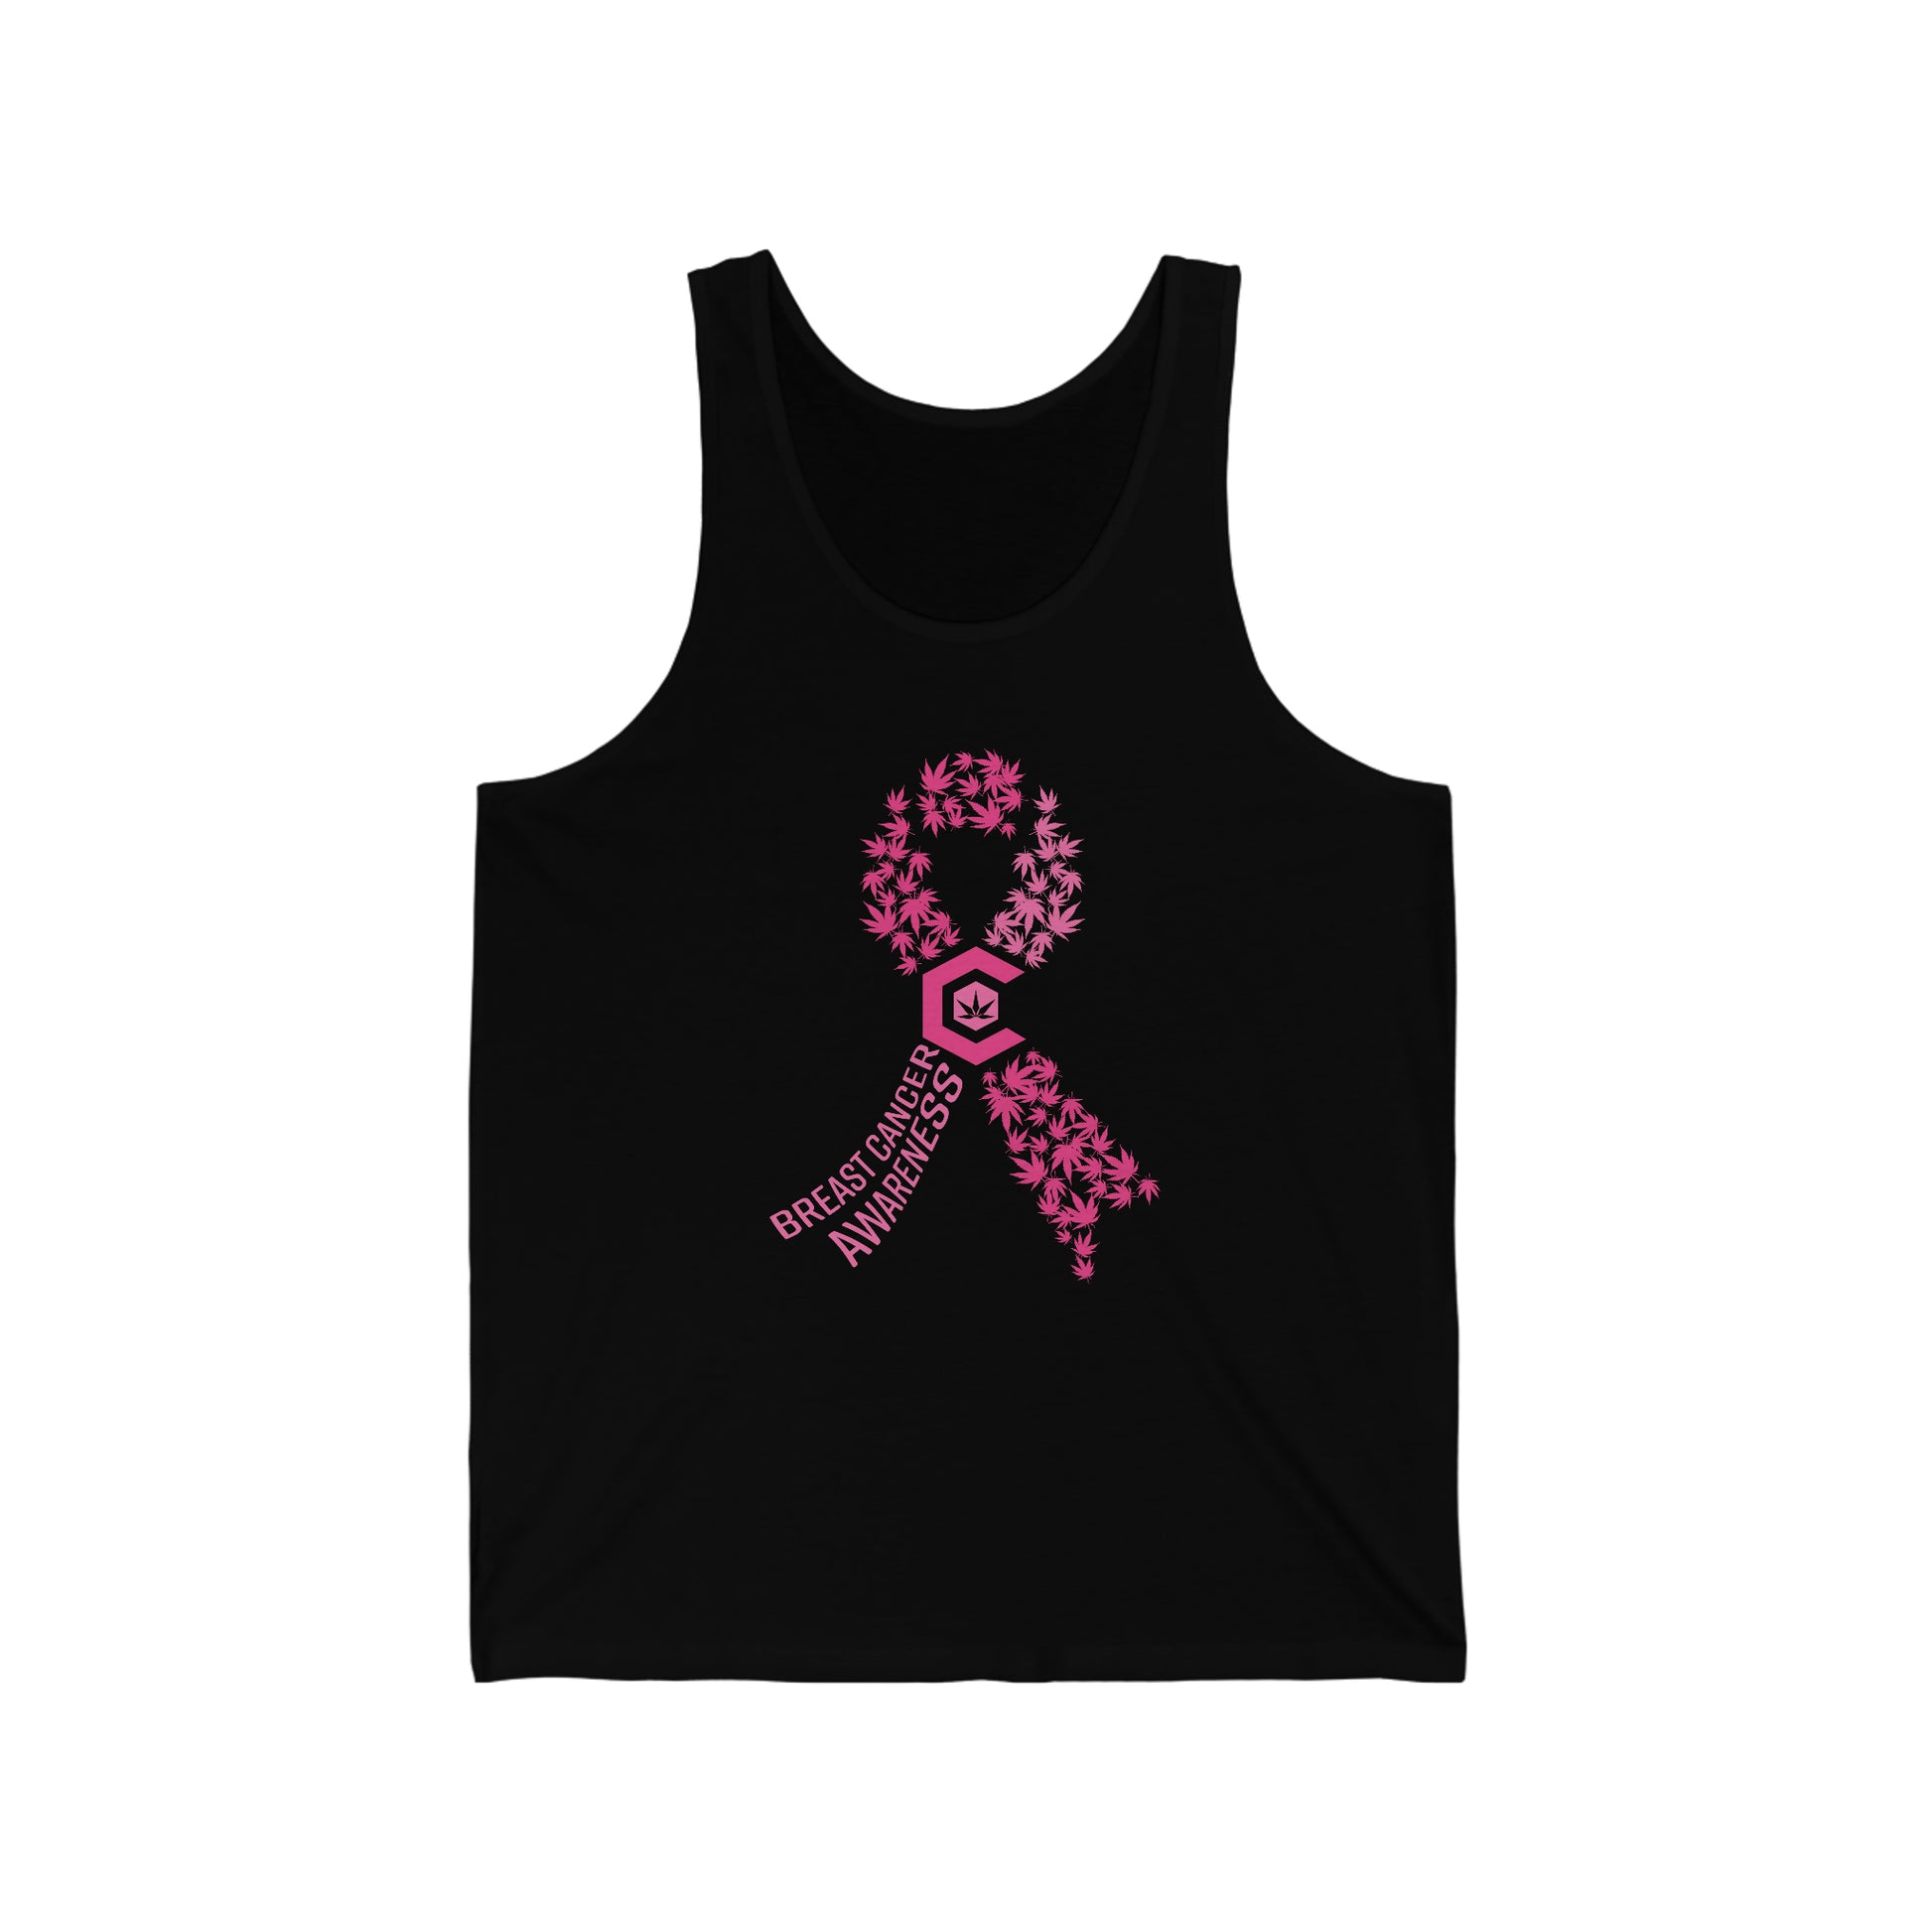 A Breast Cancer Awareness Cannabis Jersey Tank with a pink breast cancer ribbon on it.